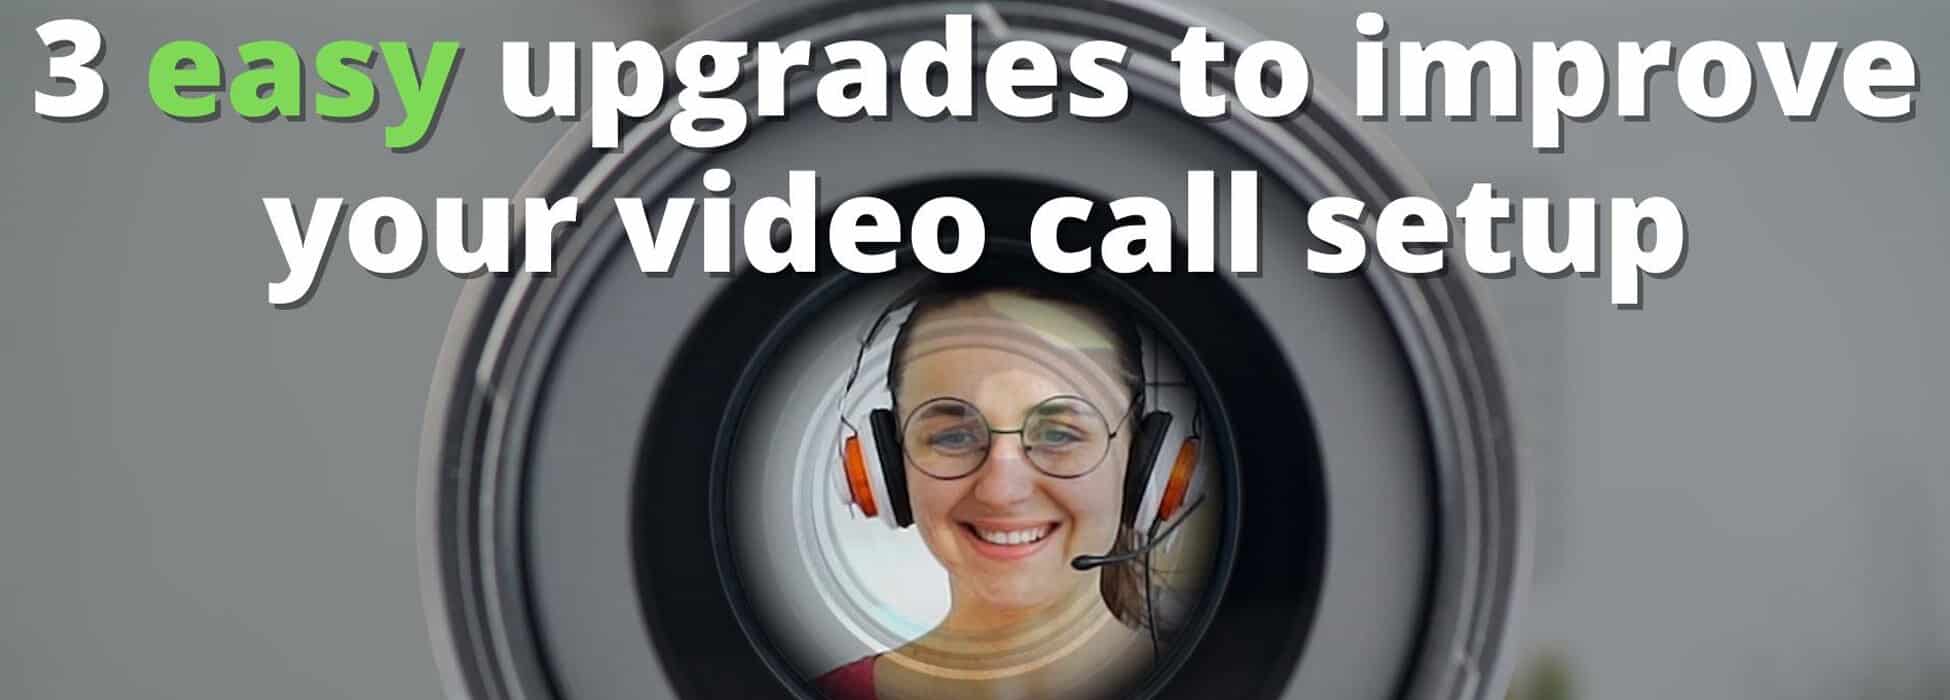 3 easy upgrades to improve your video call setup